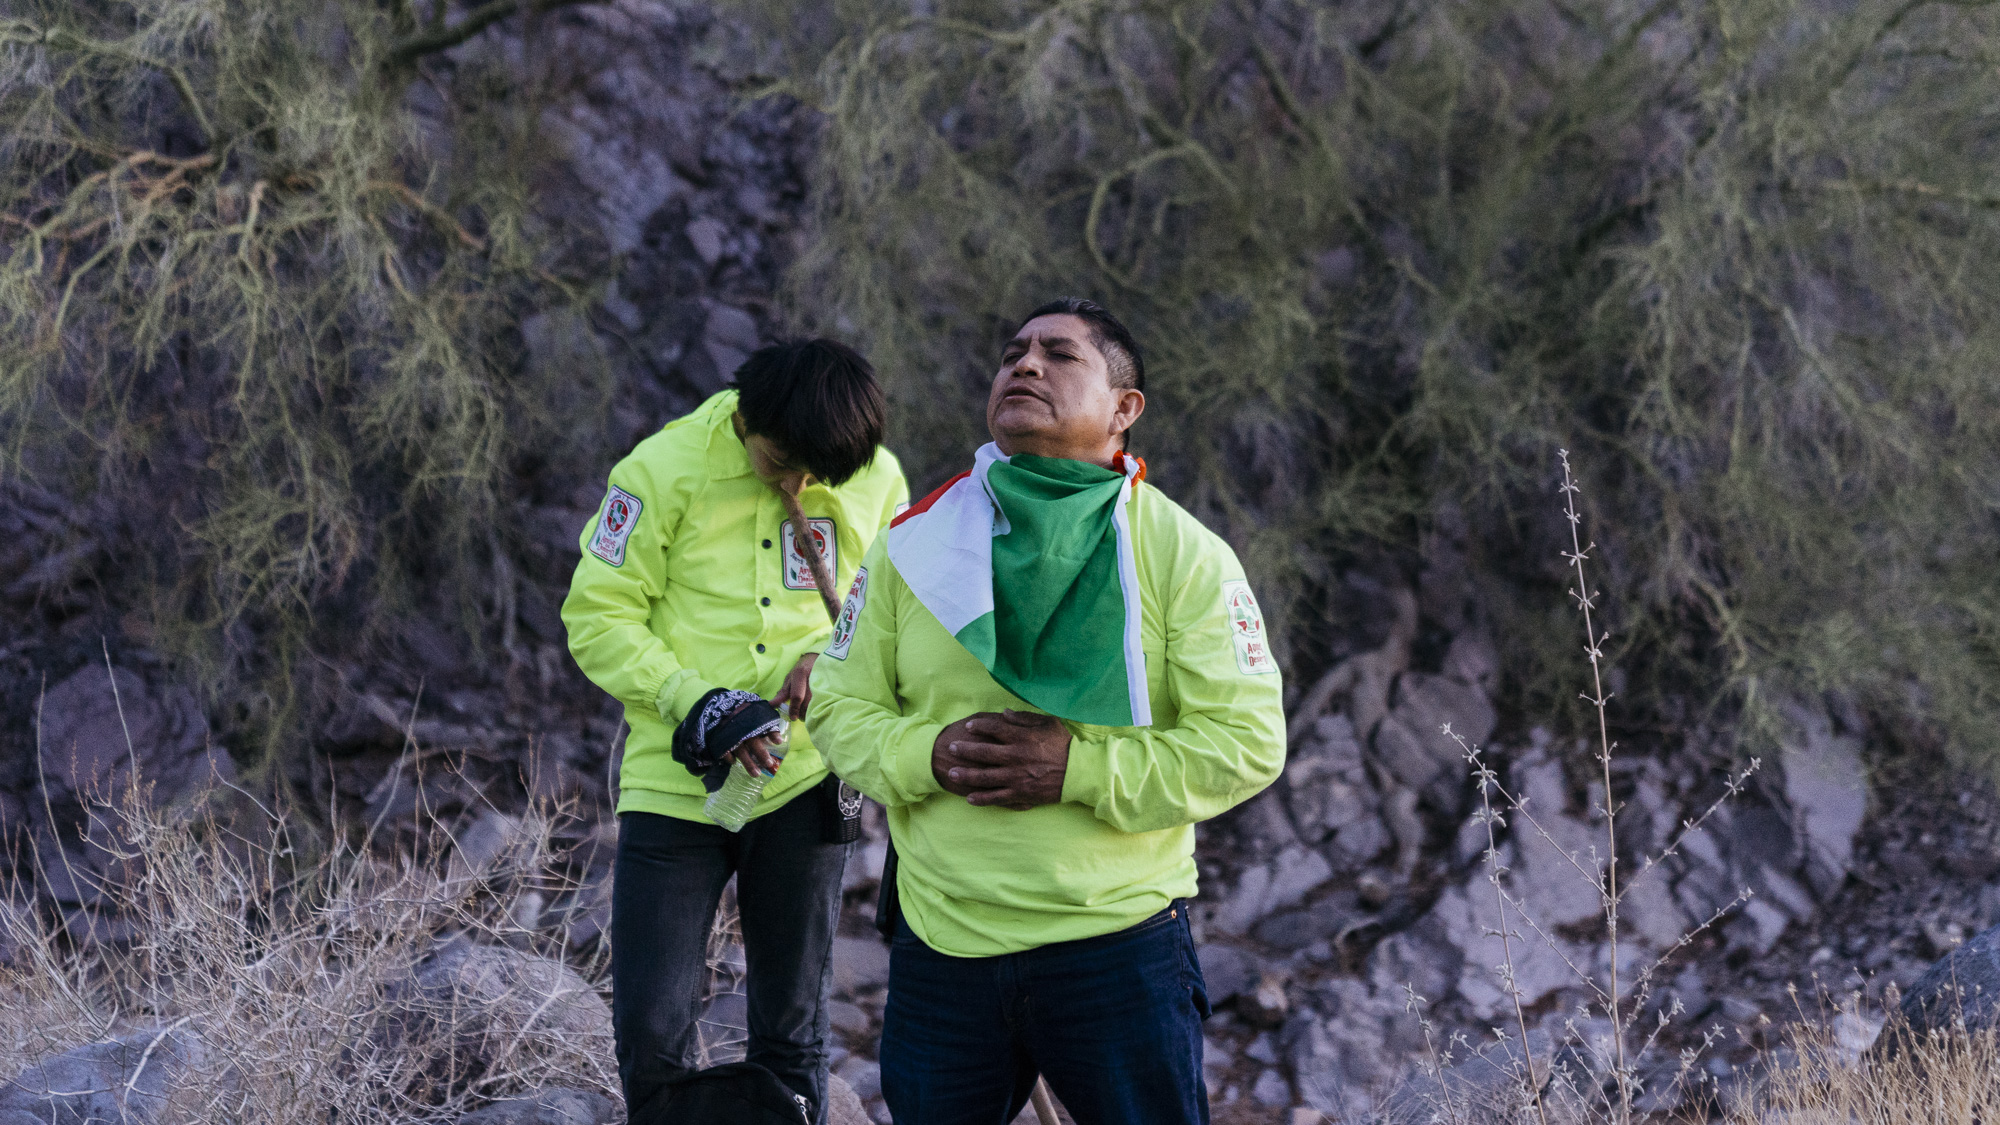  IMAGE CAPTION:  Angel Martinez (center) and 14 year old Jamie Martinez pray for their safety and the safe passage of all migrants in transit before beginning a sunrise to sunset desert search for lost and deceased migrants. &nbsp; 